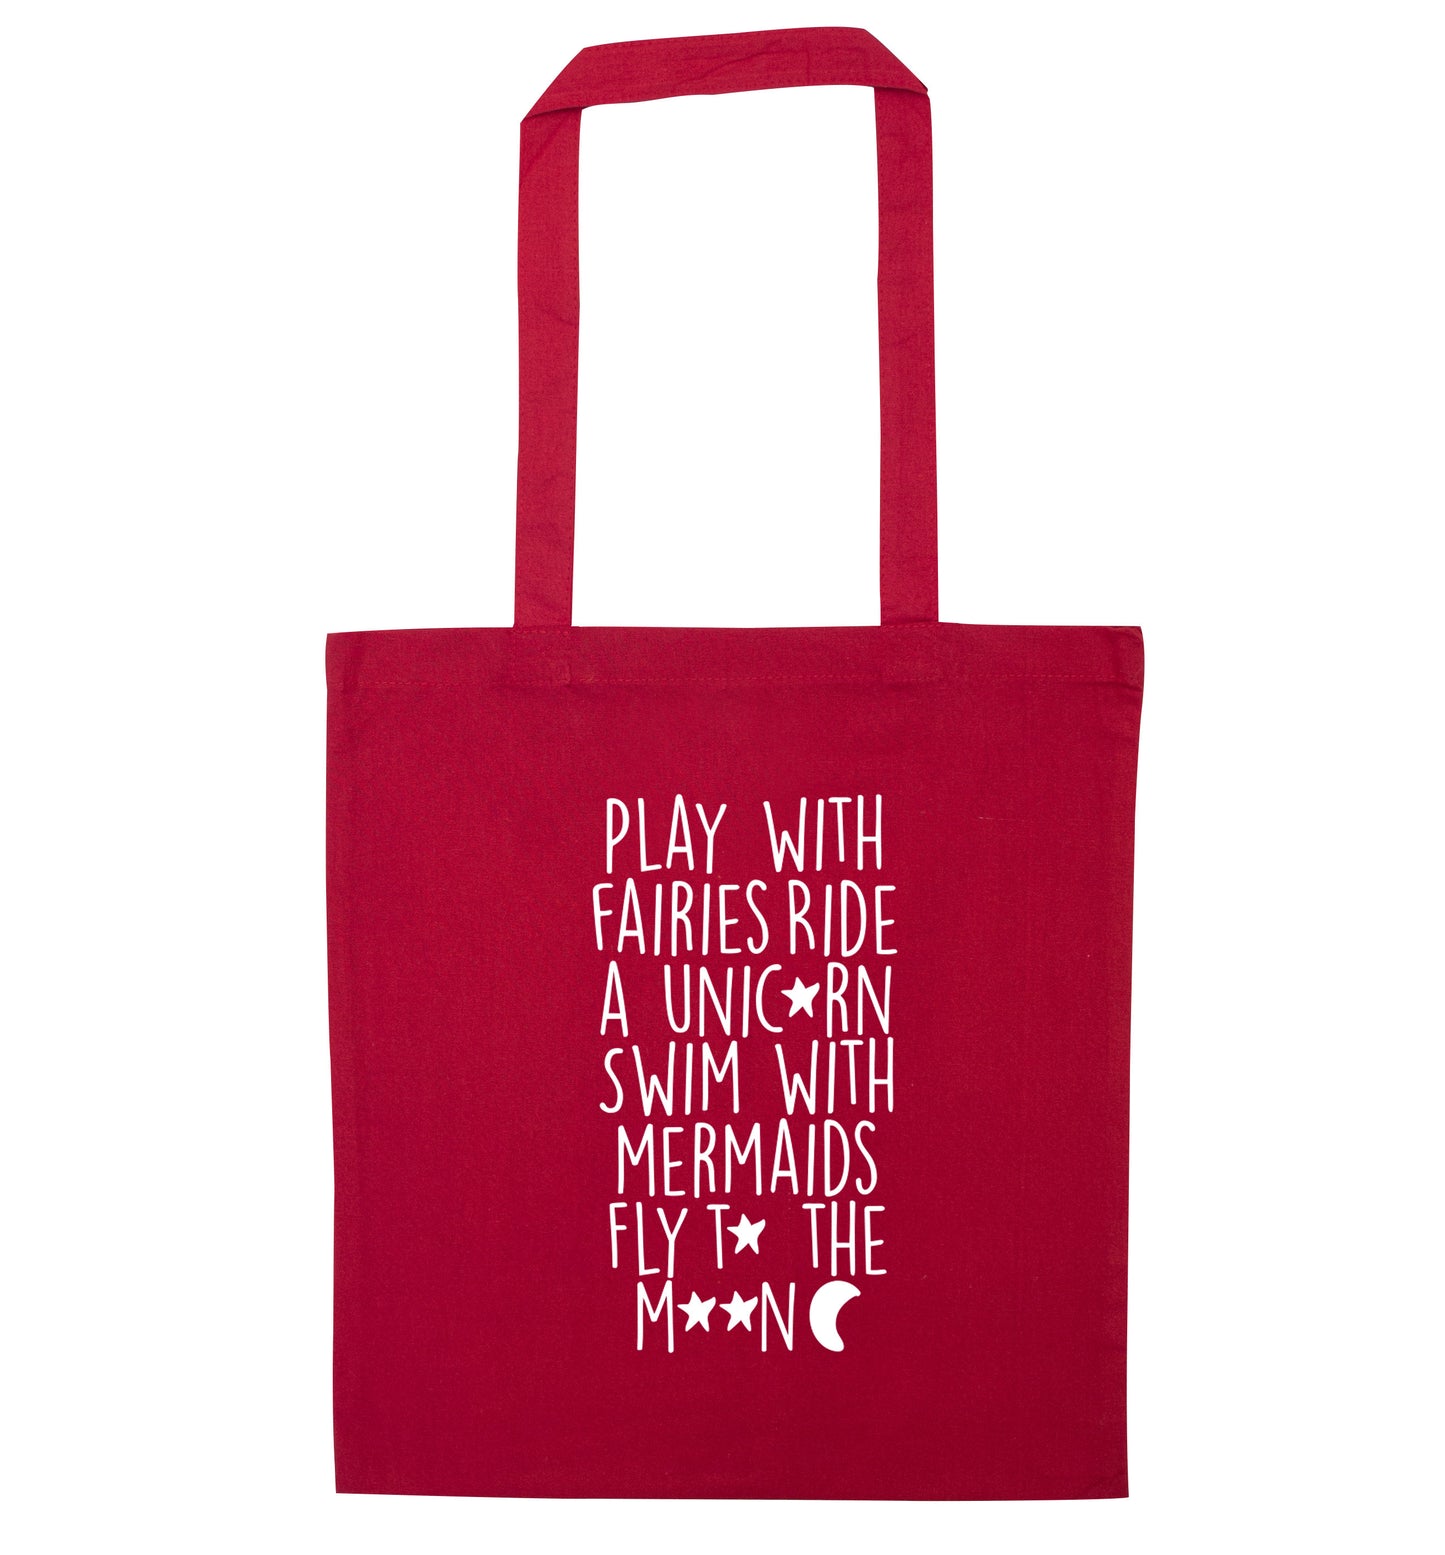 Play with fairies ride a unicorn swim with mermaids fly to the moon red tote bag